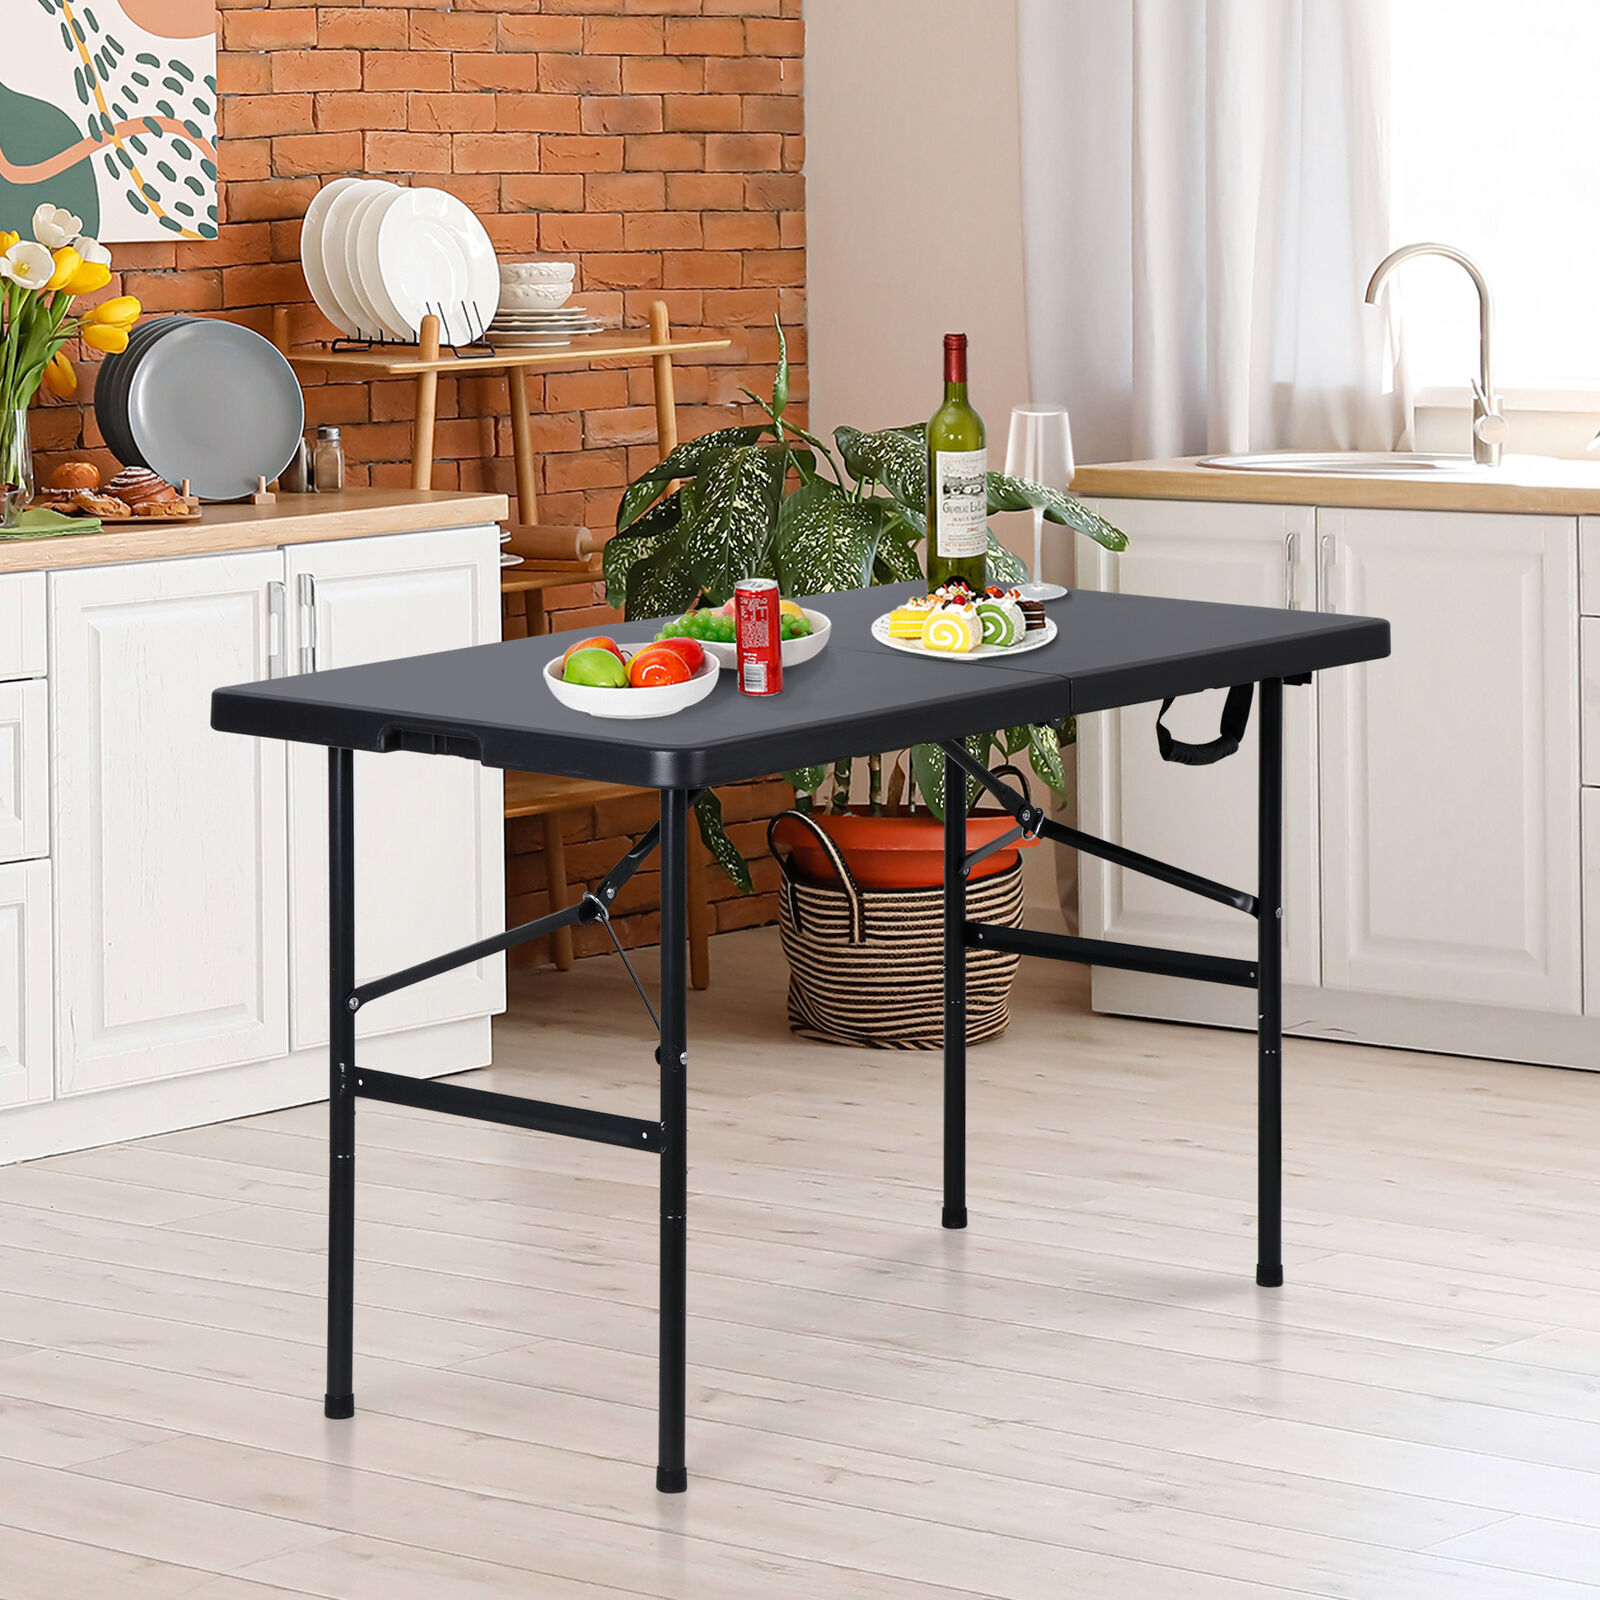 Great Choice Products 48" Portable Folding Table Plastic Fold-In-Half Desk W/ Carry Handle, Black